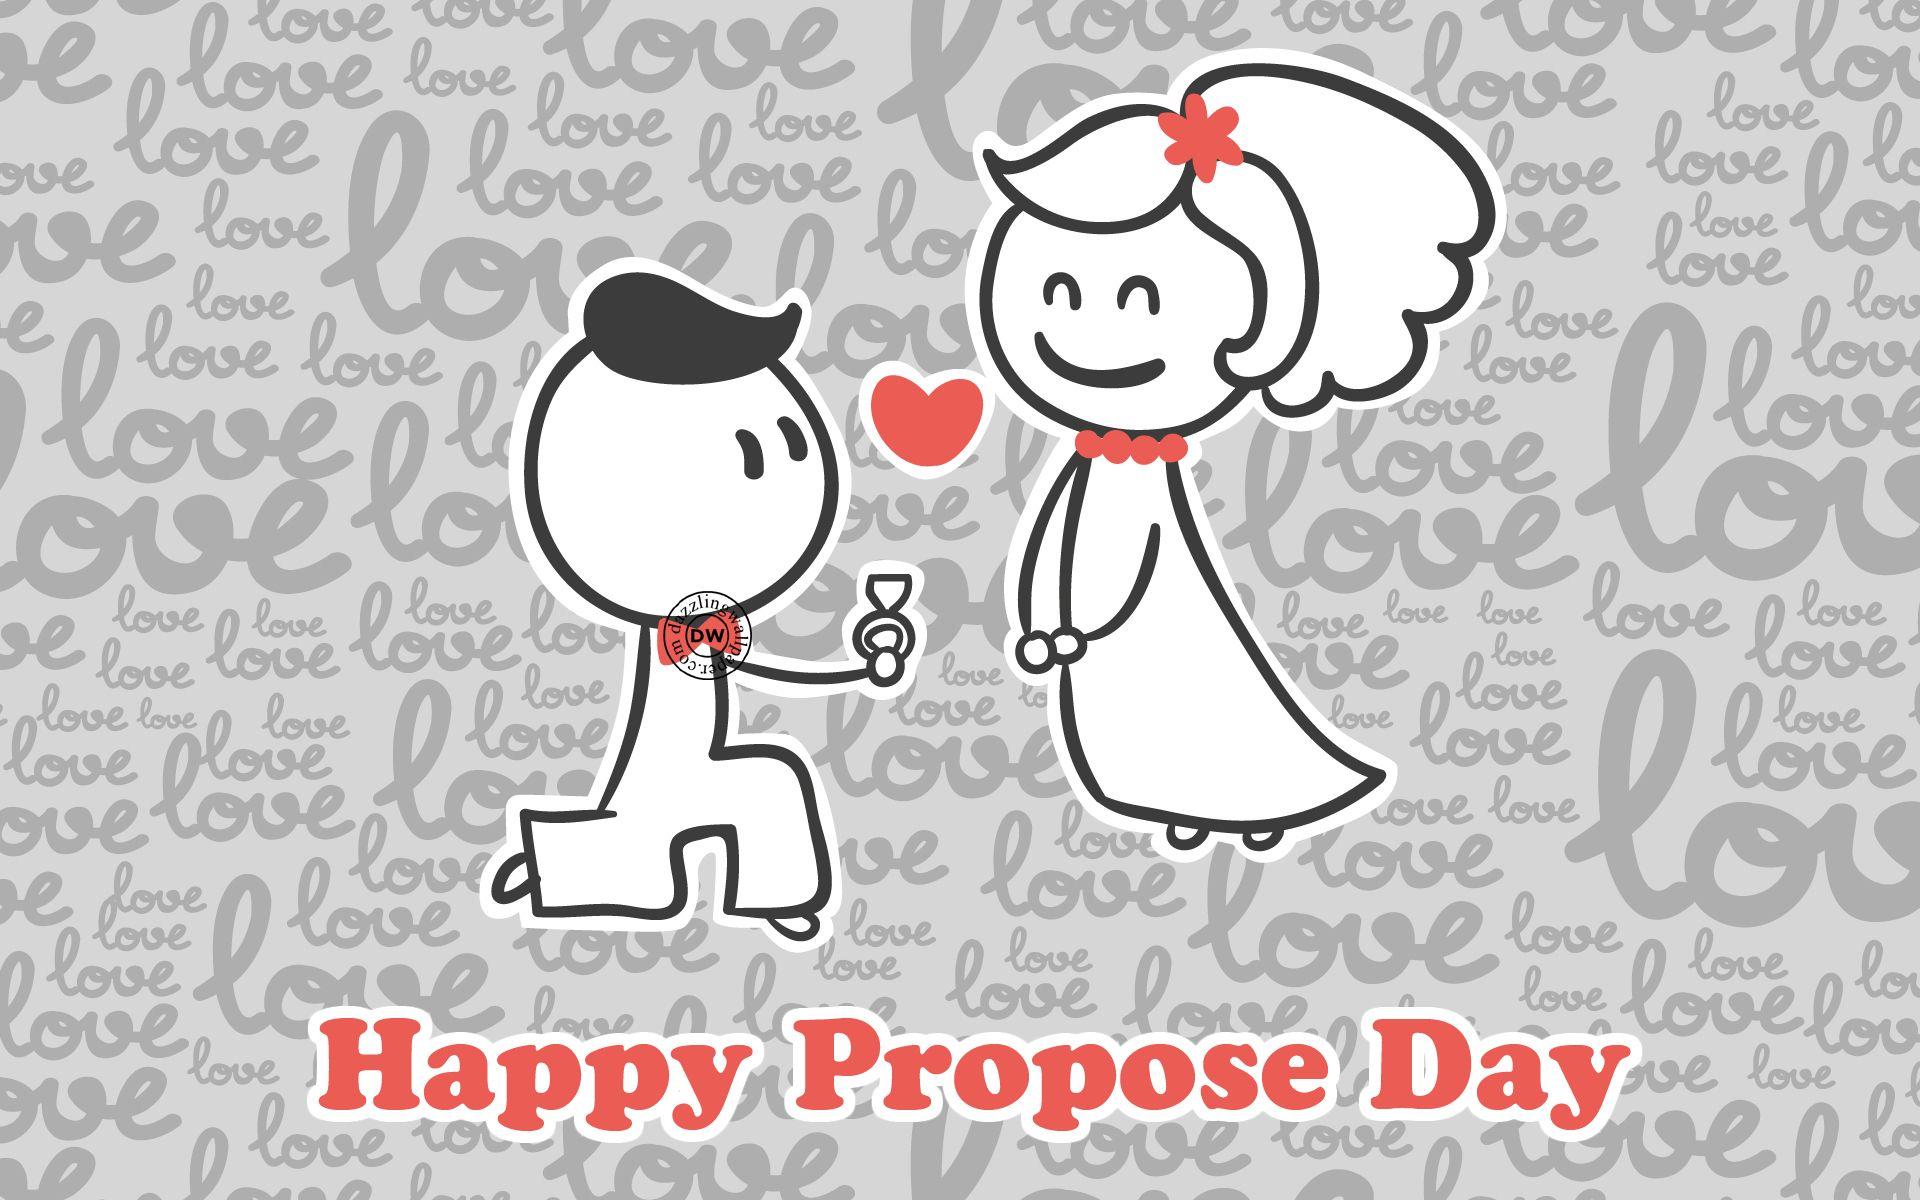 Happy Propose Day Images And Wallpaper  Happy Propose Day